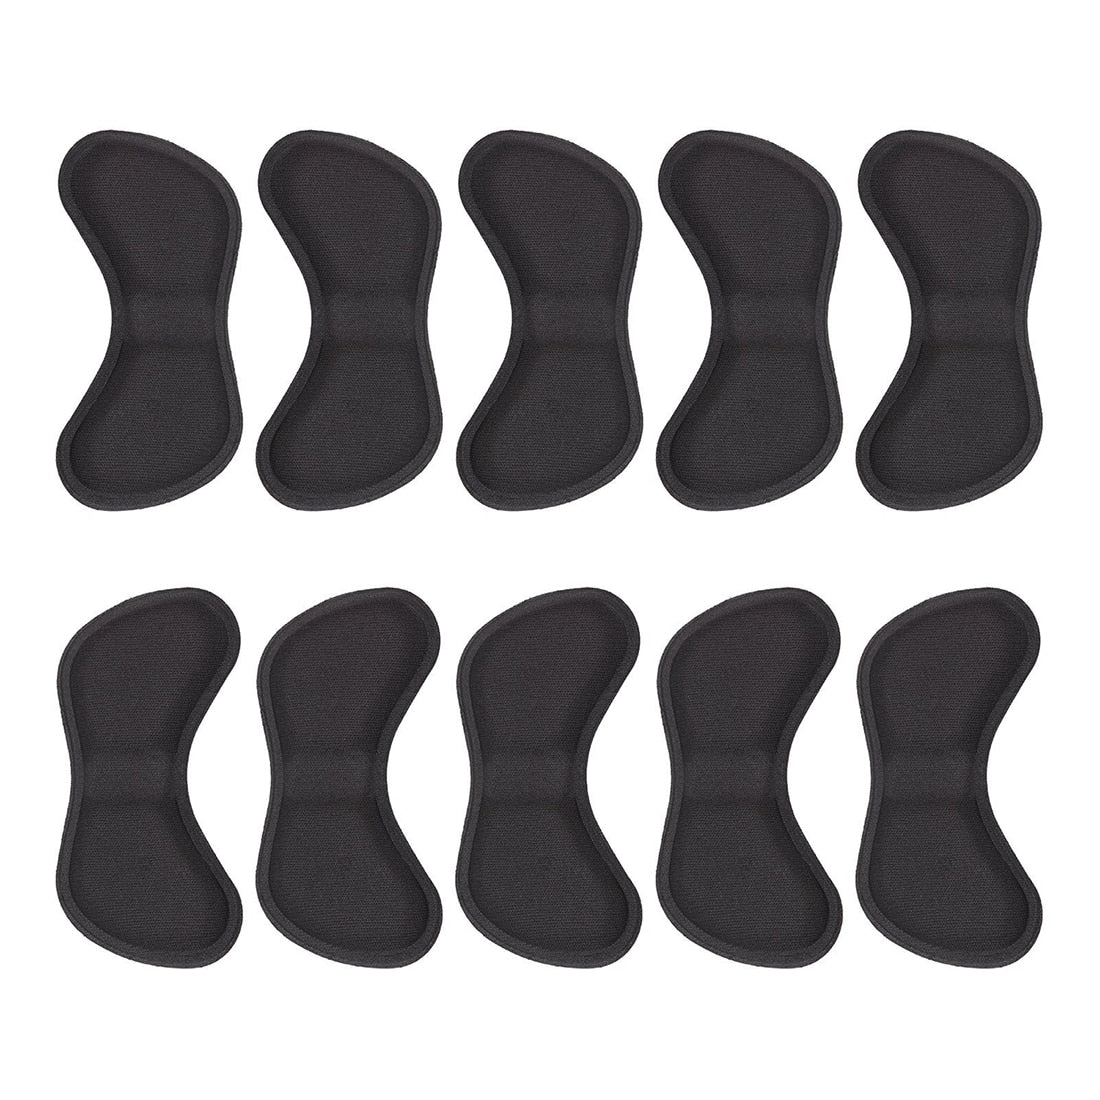 Hot-5 Pairs Heel Grip Liner Self Adhesive Shoe Insoles Cushion Pads Stickers Foot Care Protector - ebowsos